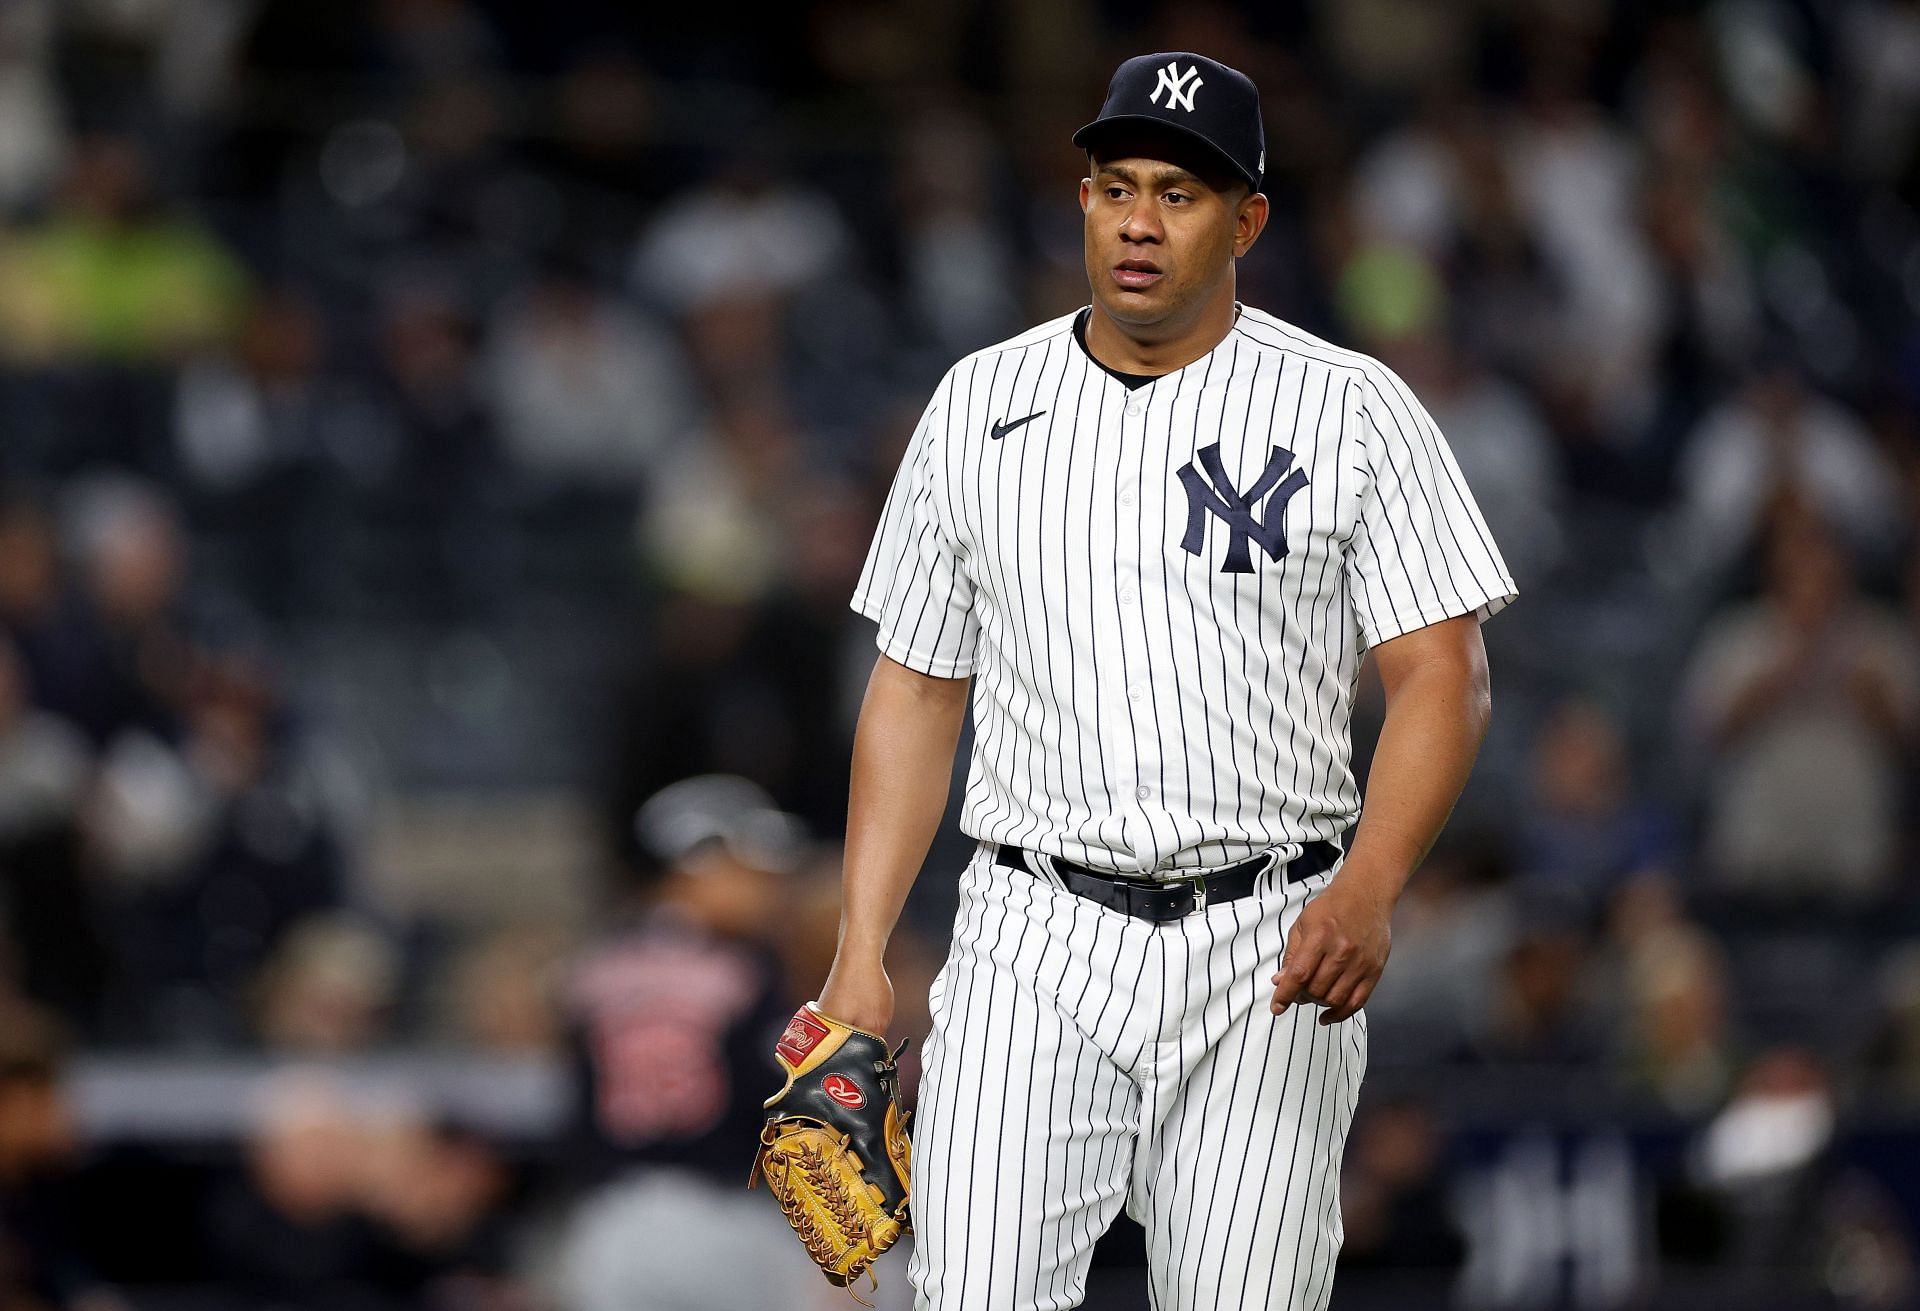 The Yankees may miss the MLB playoffs